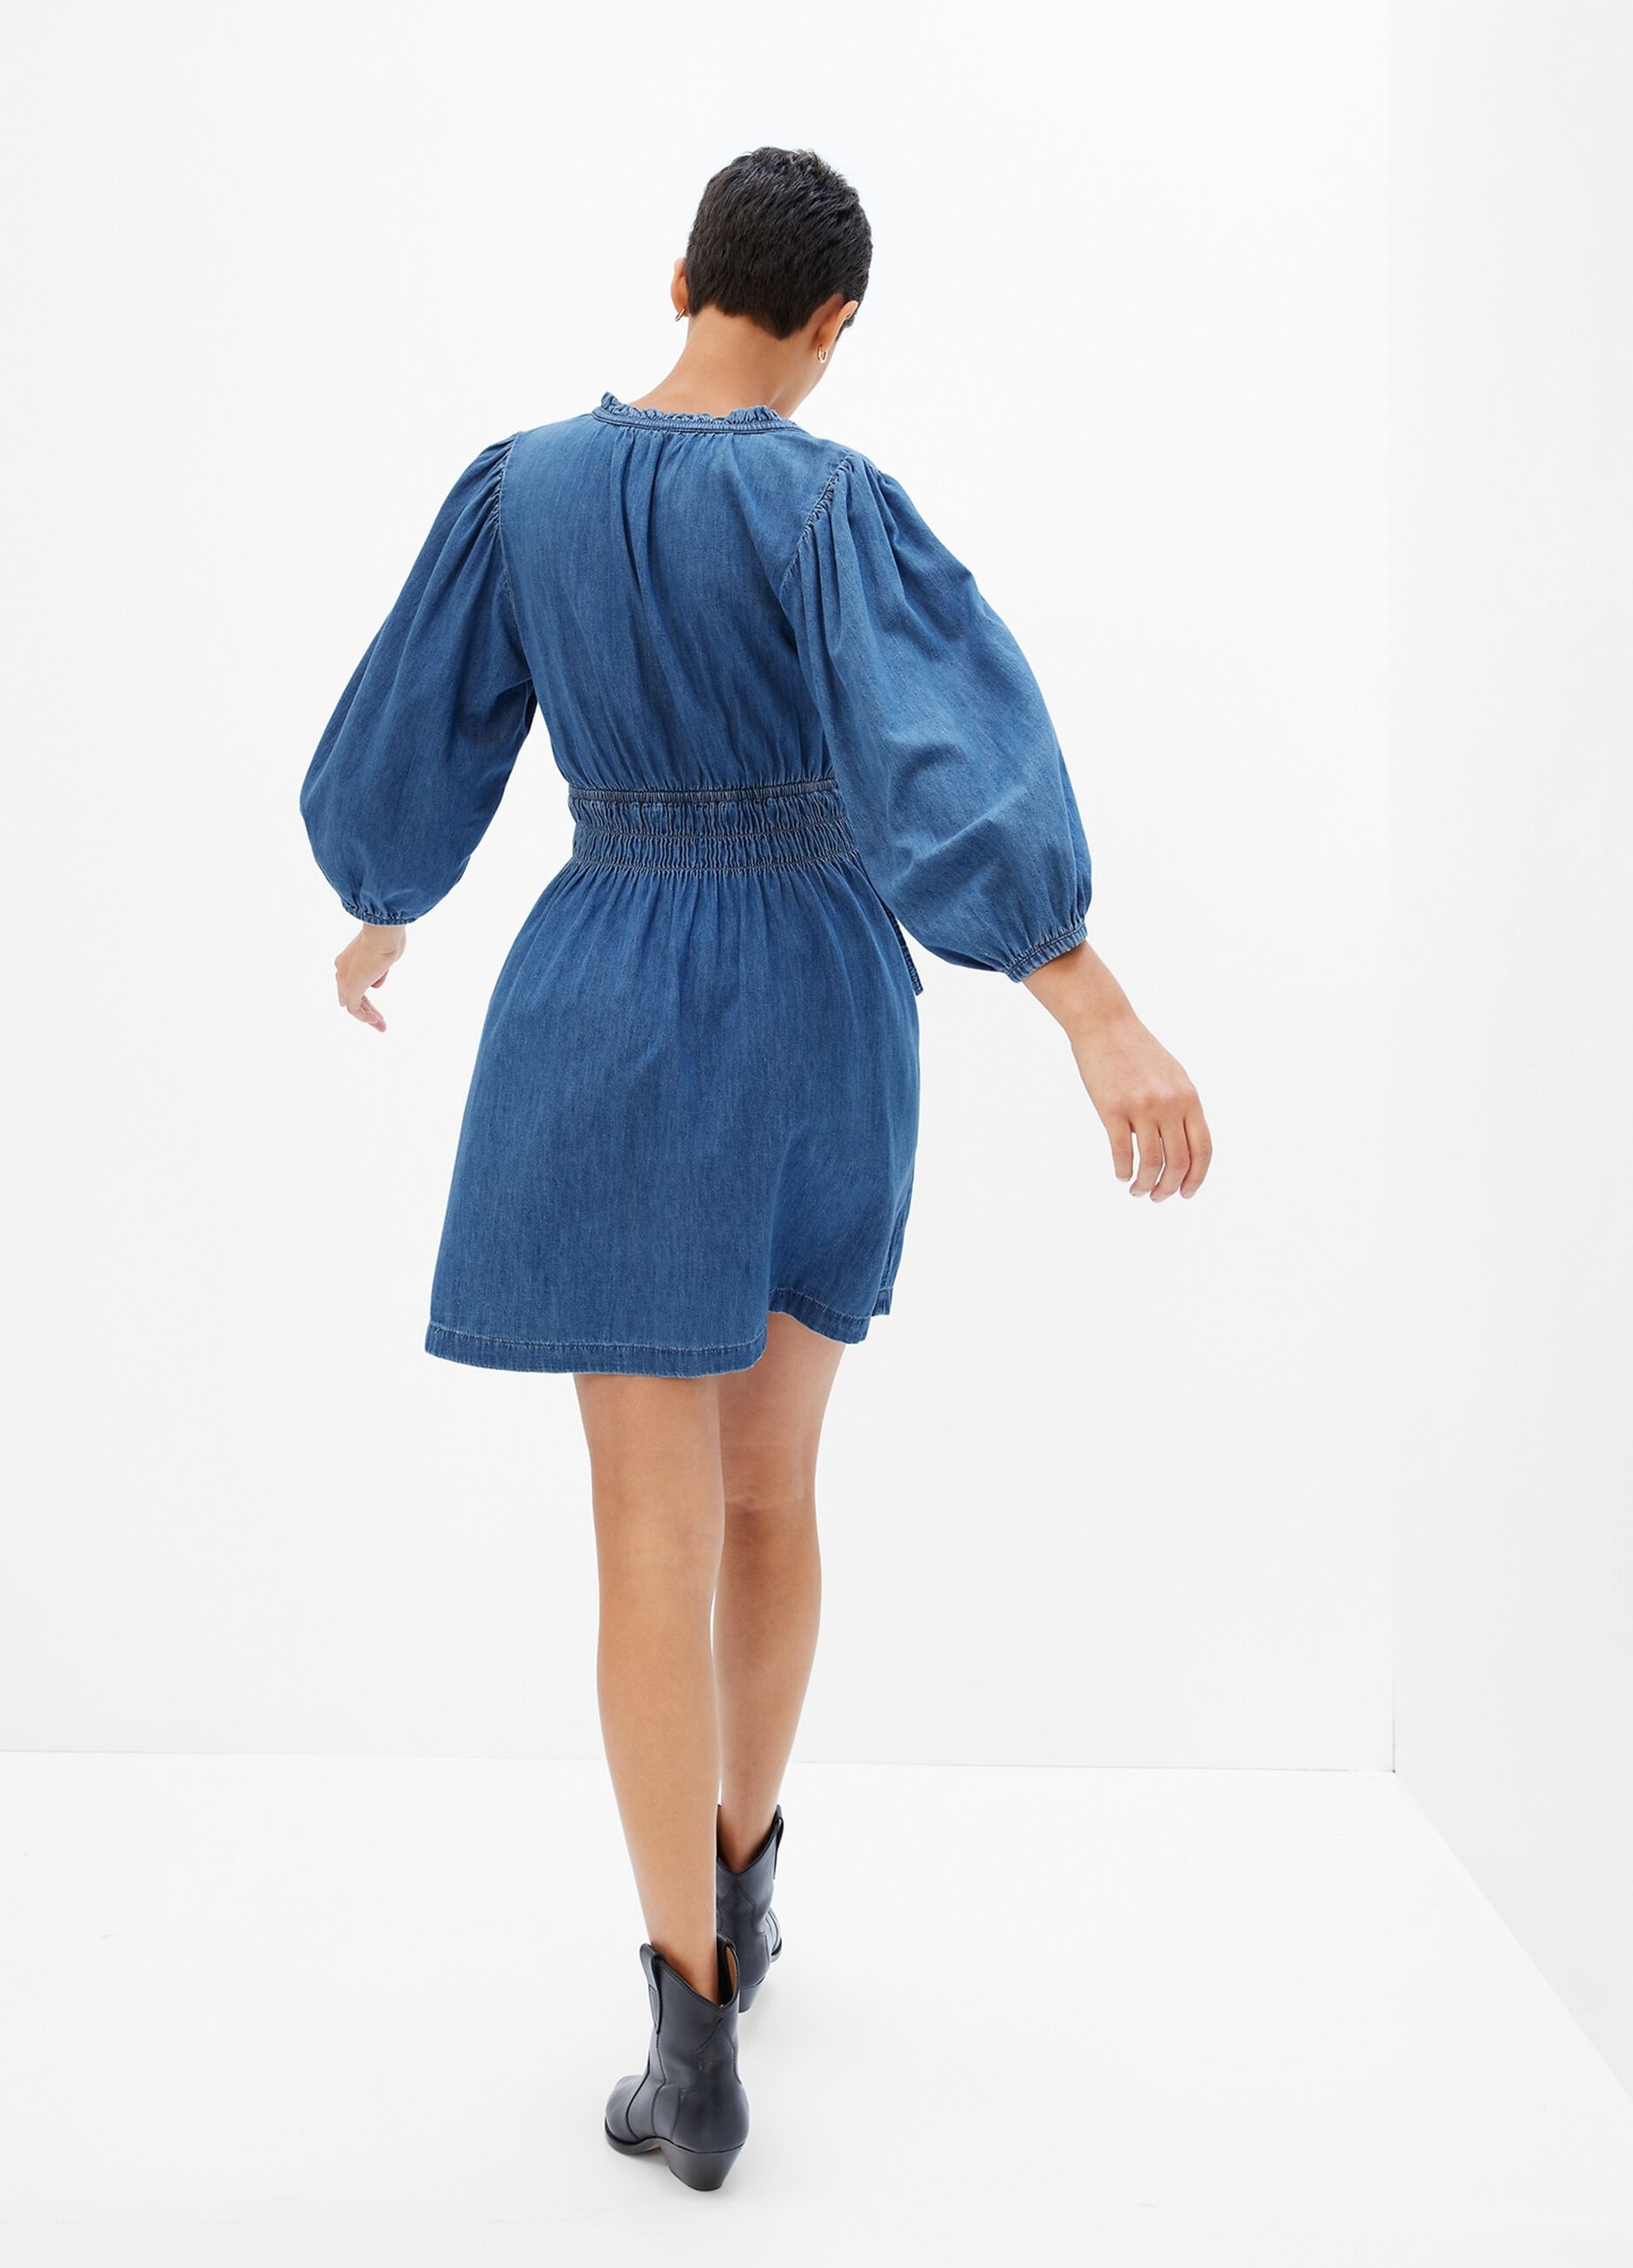 Denim dress with puff sleeves